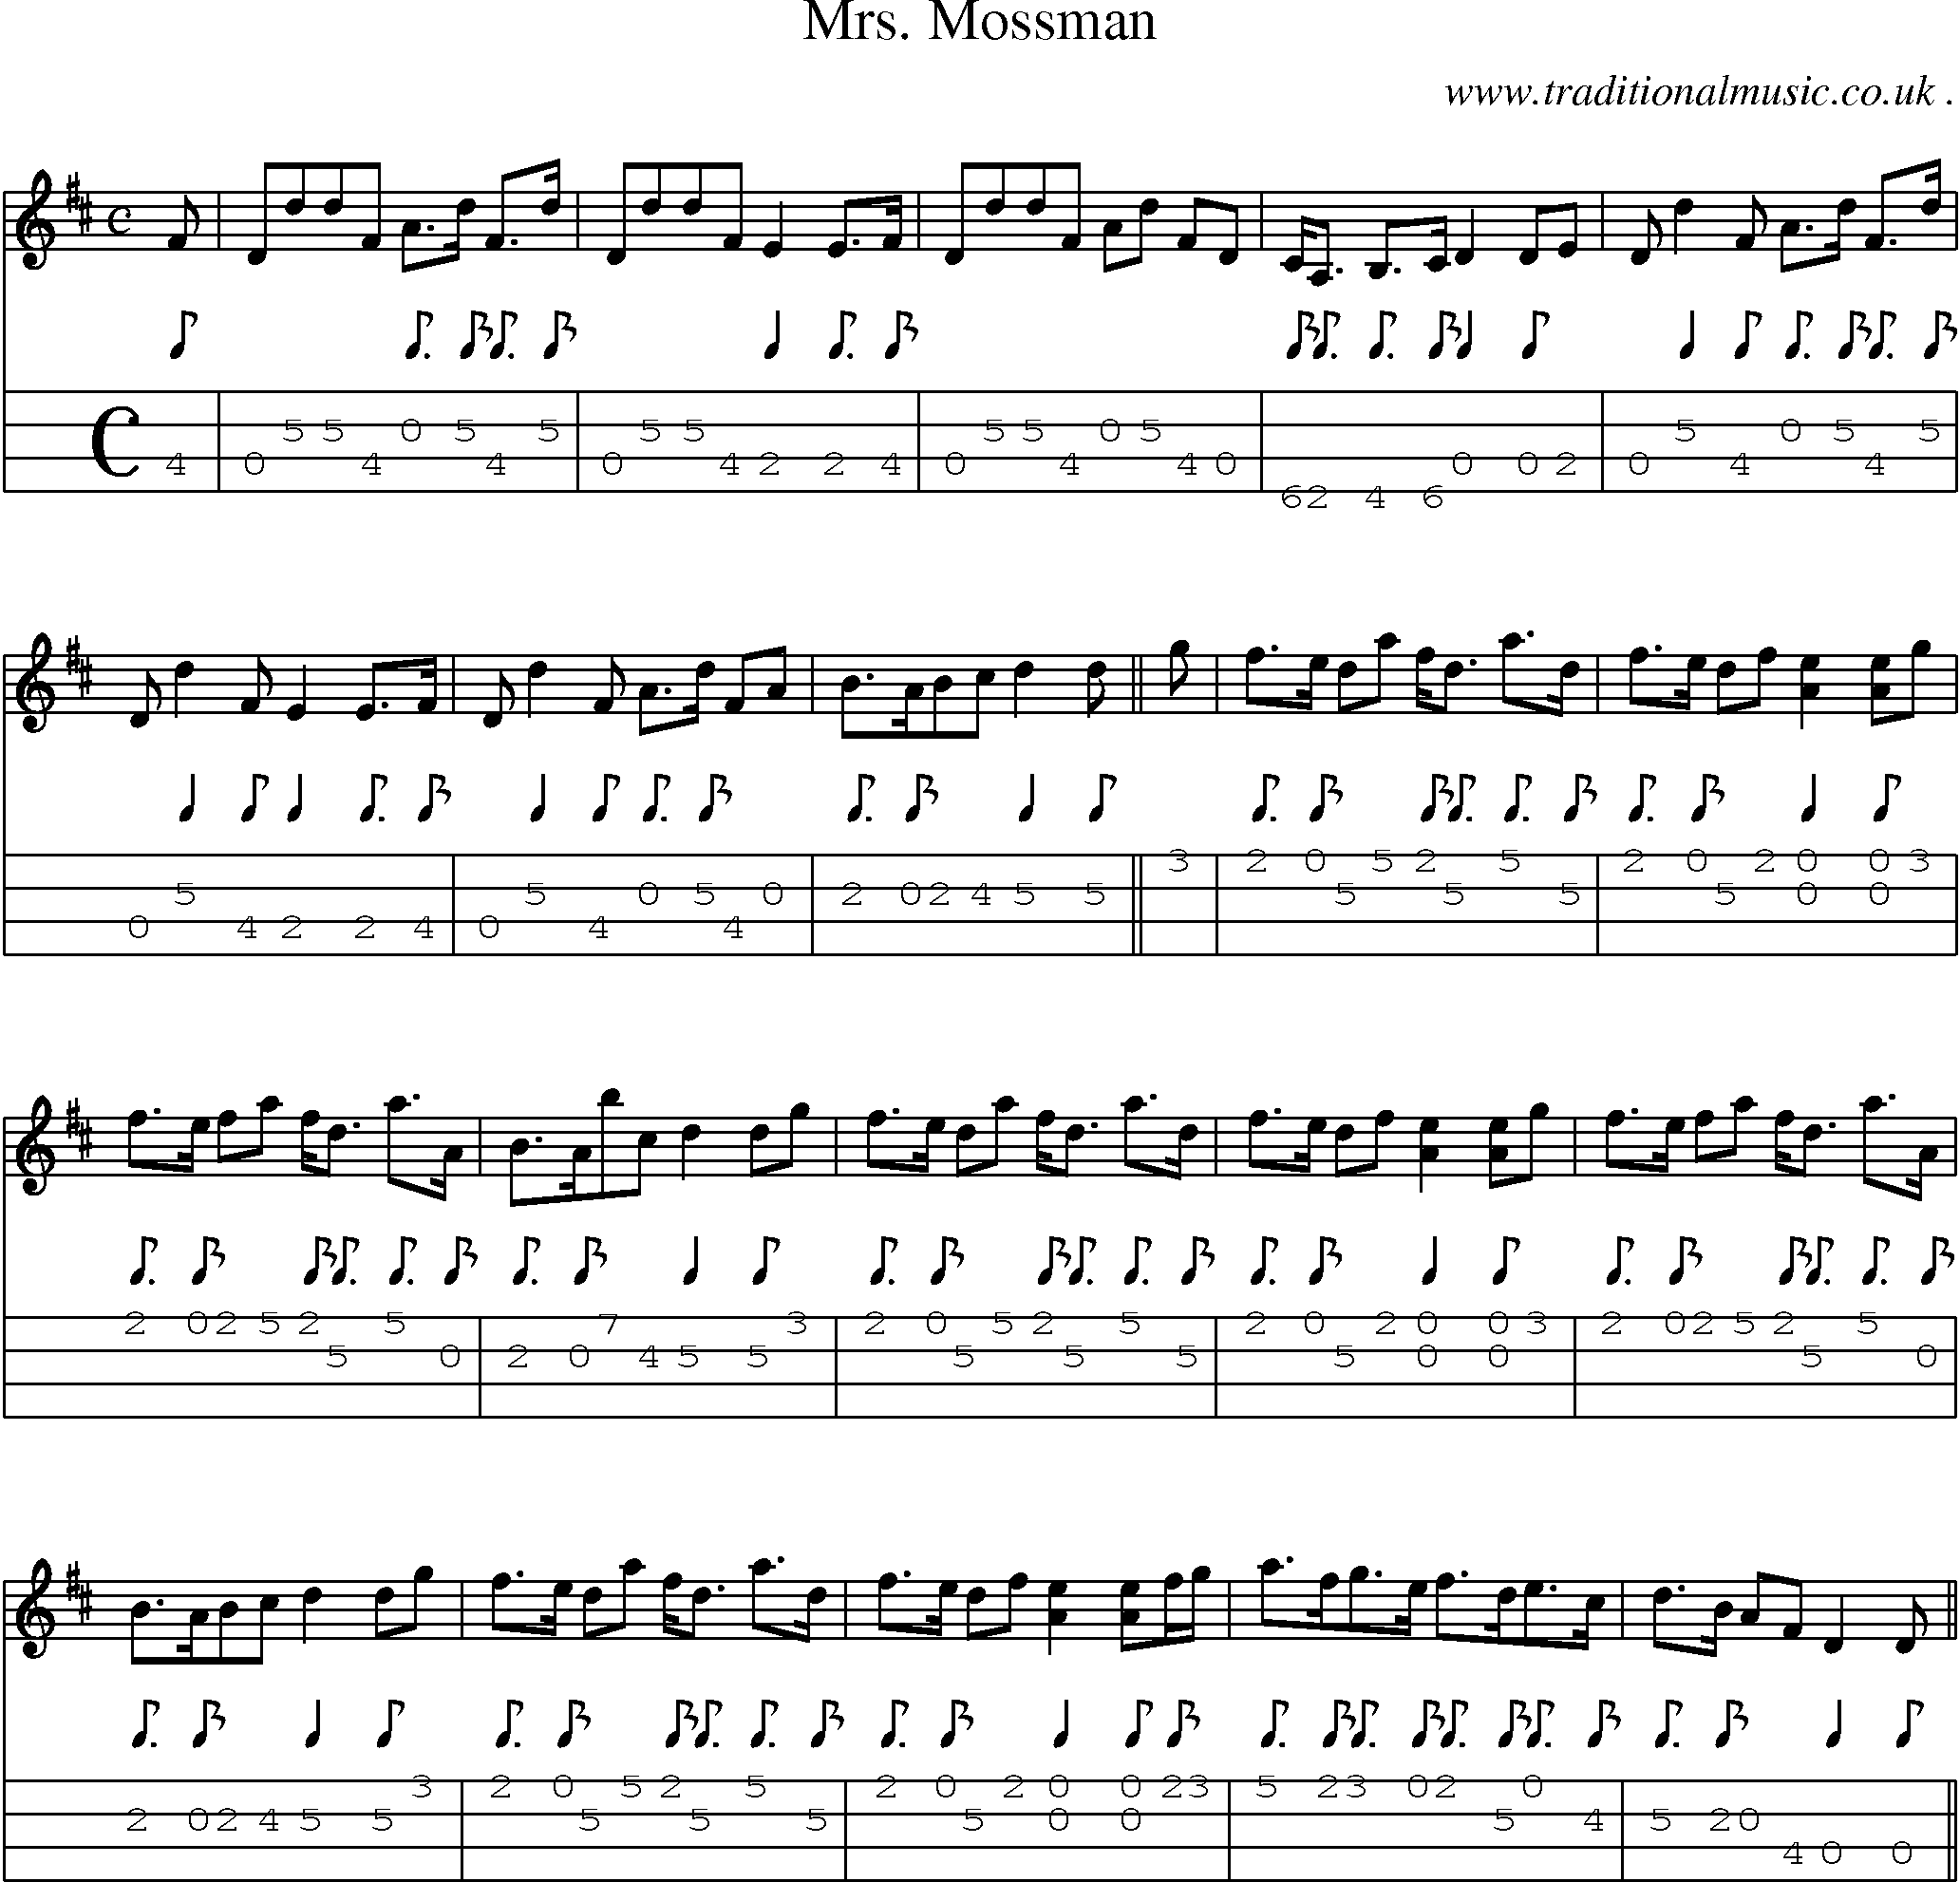 Sheet-music  score, Chords and Mandolin Tabs for Mrs Mossman